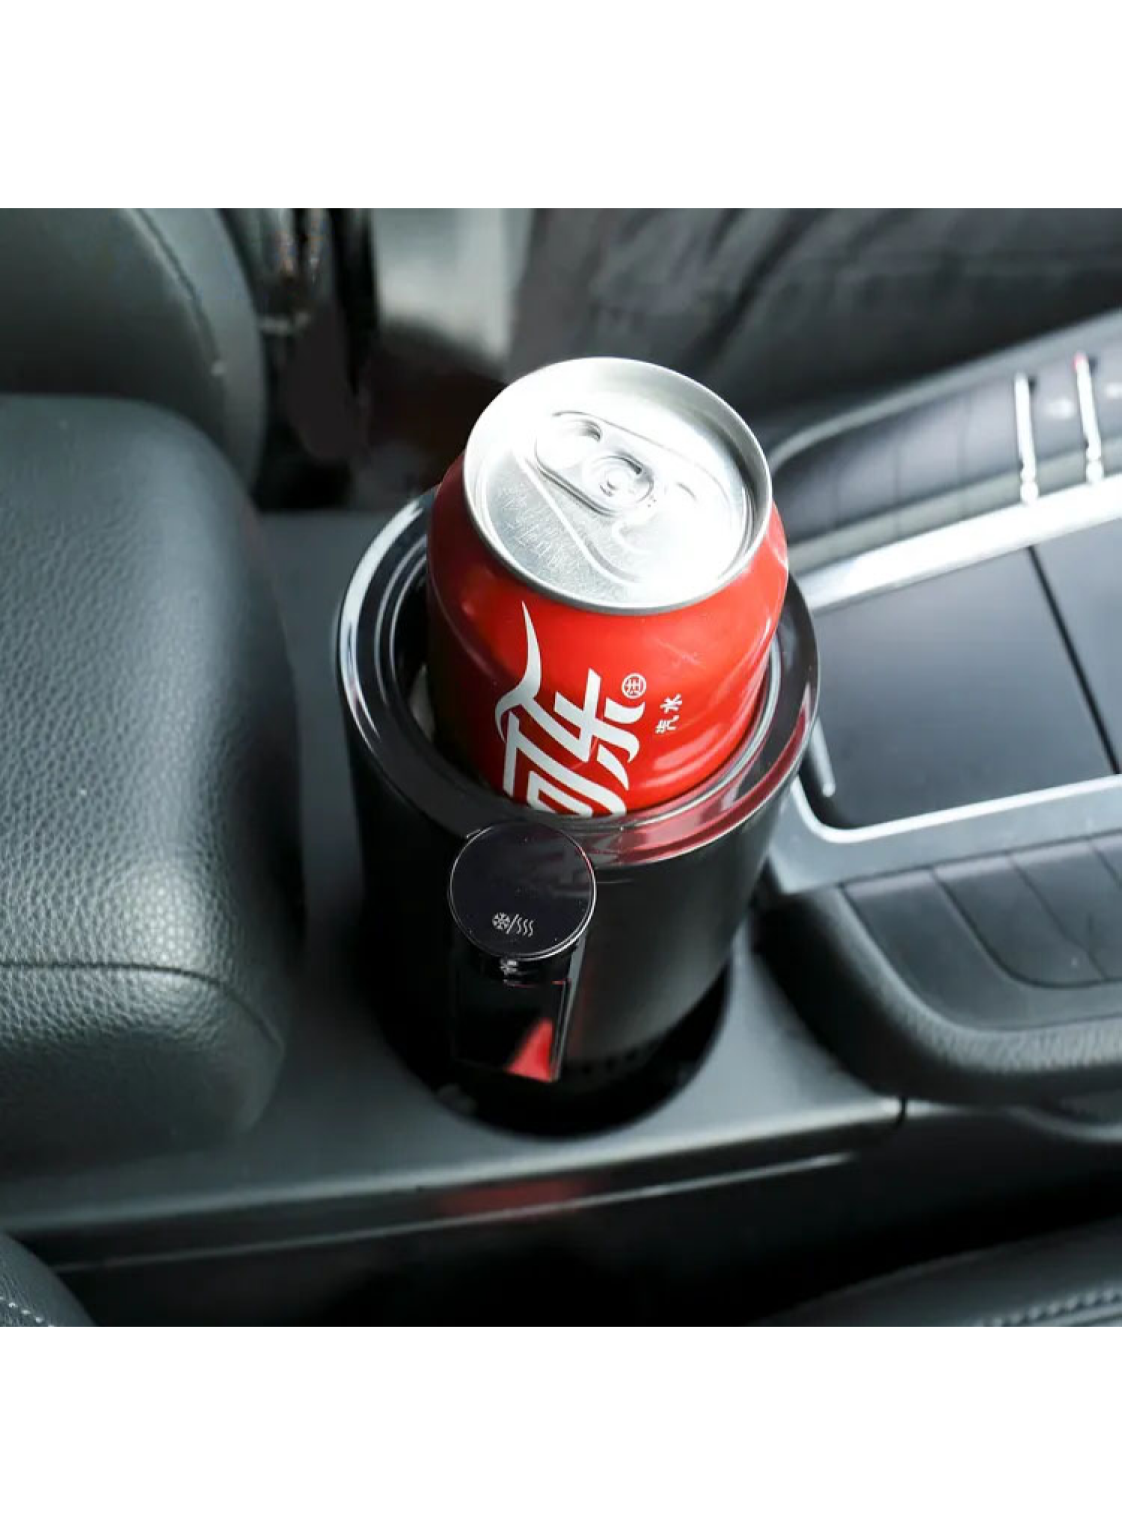 Car cooling and heating cup holder with LED temperature